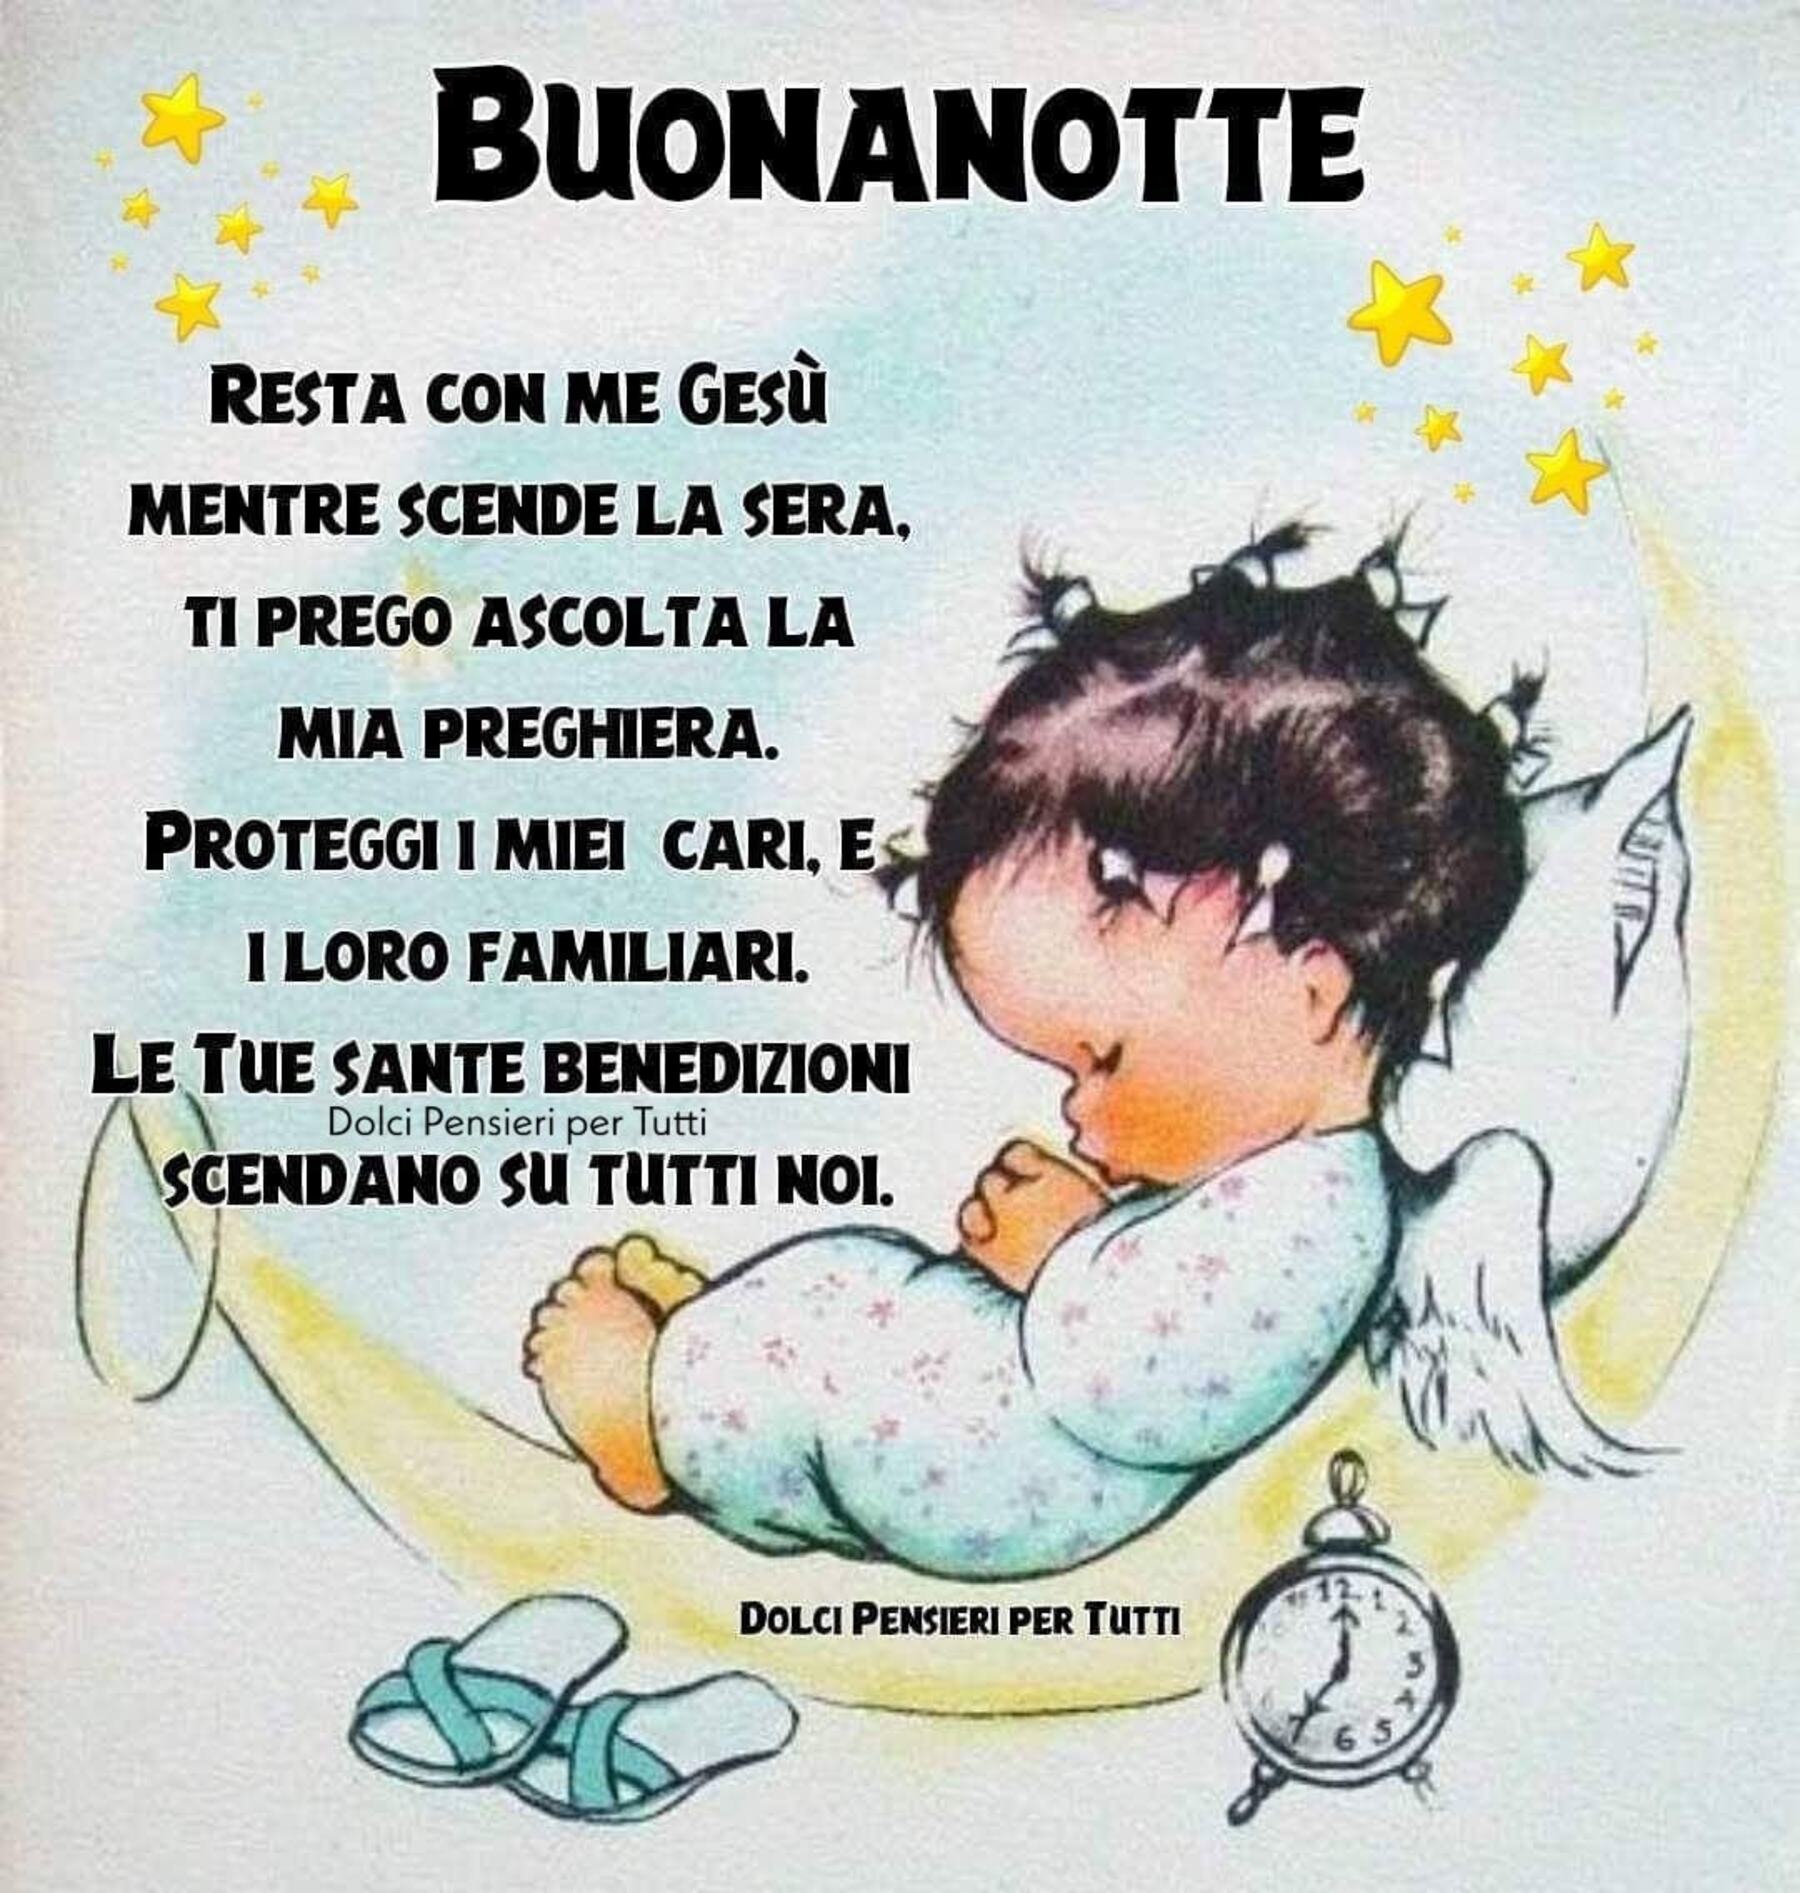 Notte angioletto